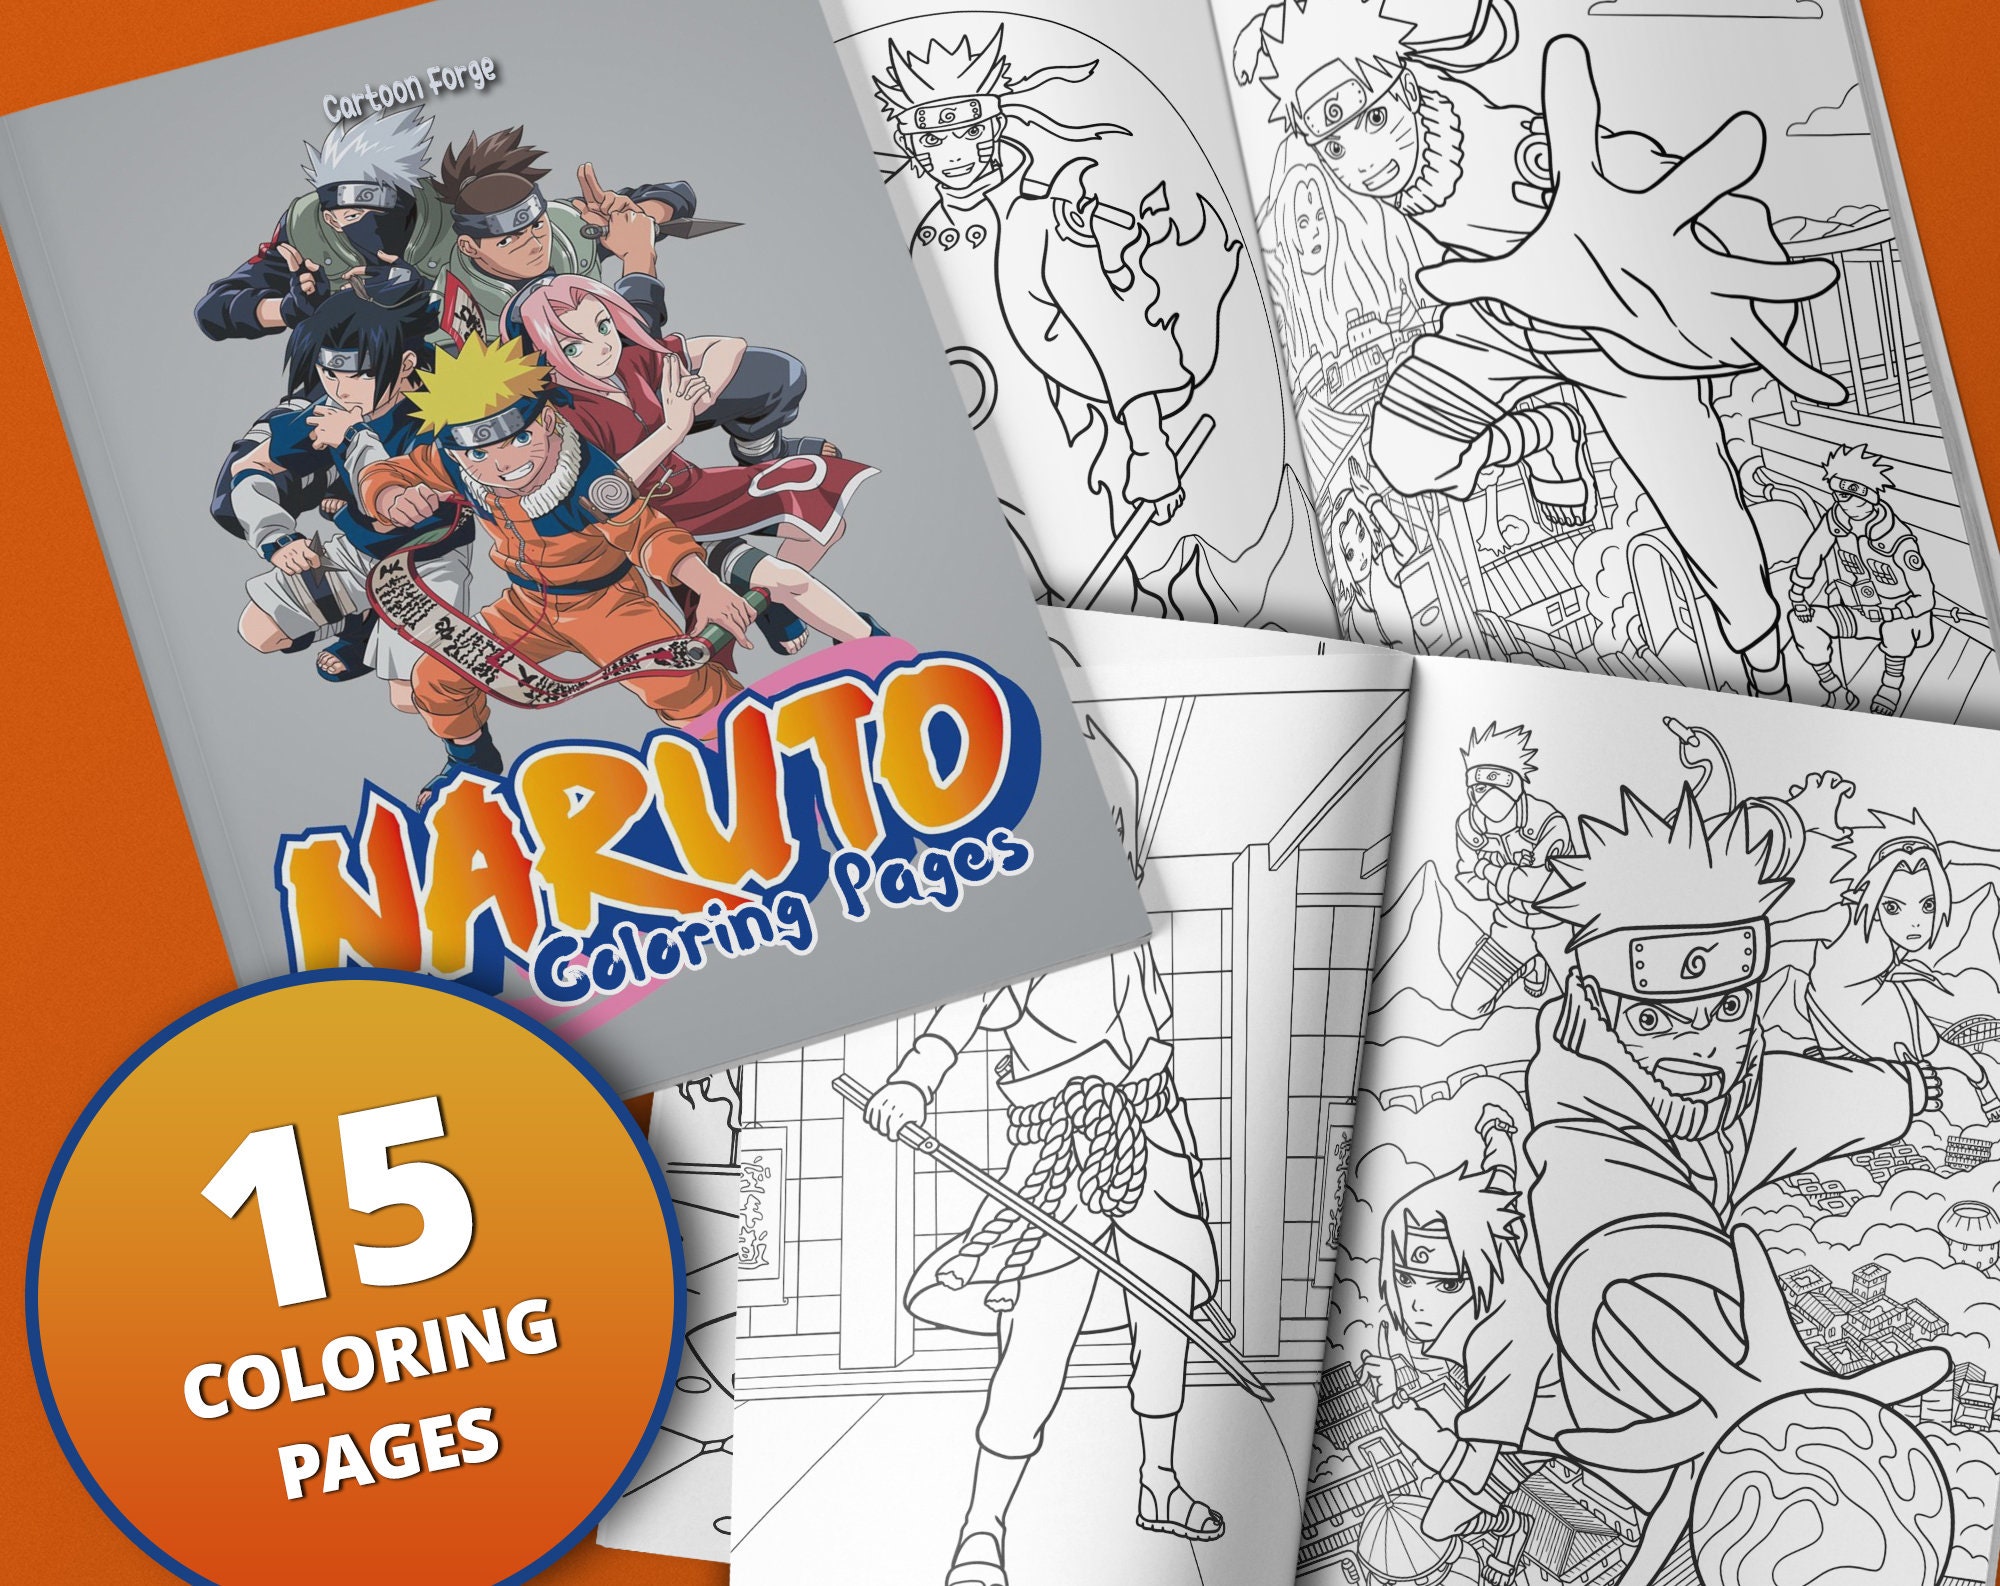 Naruto Coloring Book | Anime Coloring Book | Buy Now | at Mighty Ape NZ